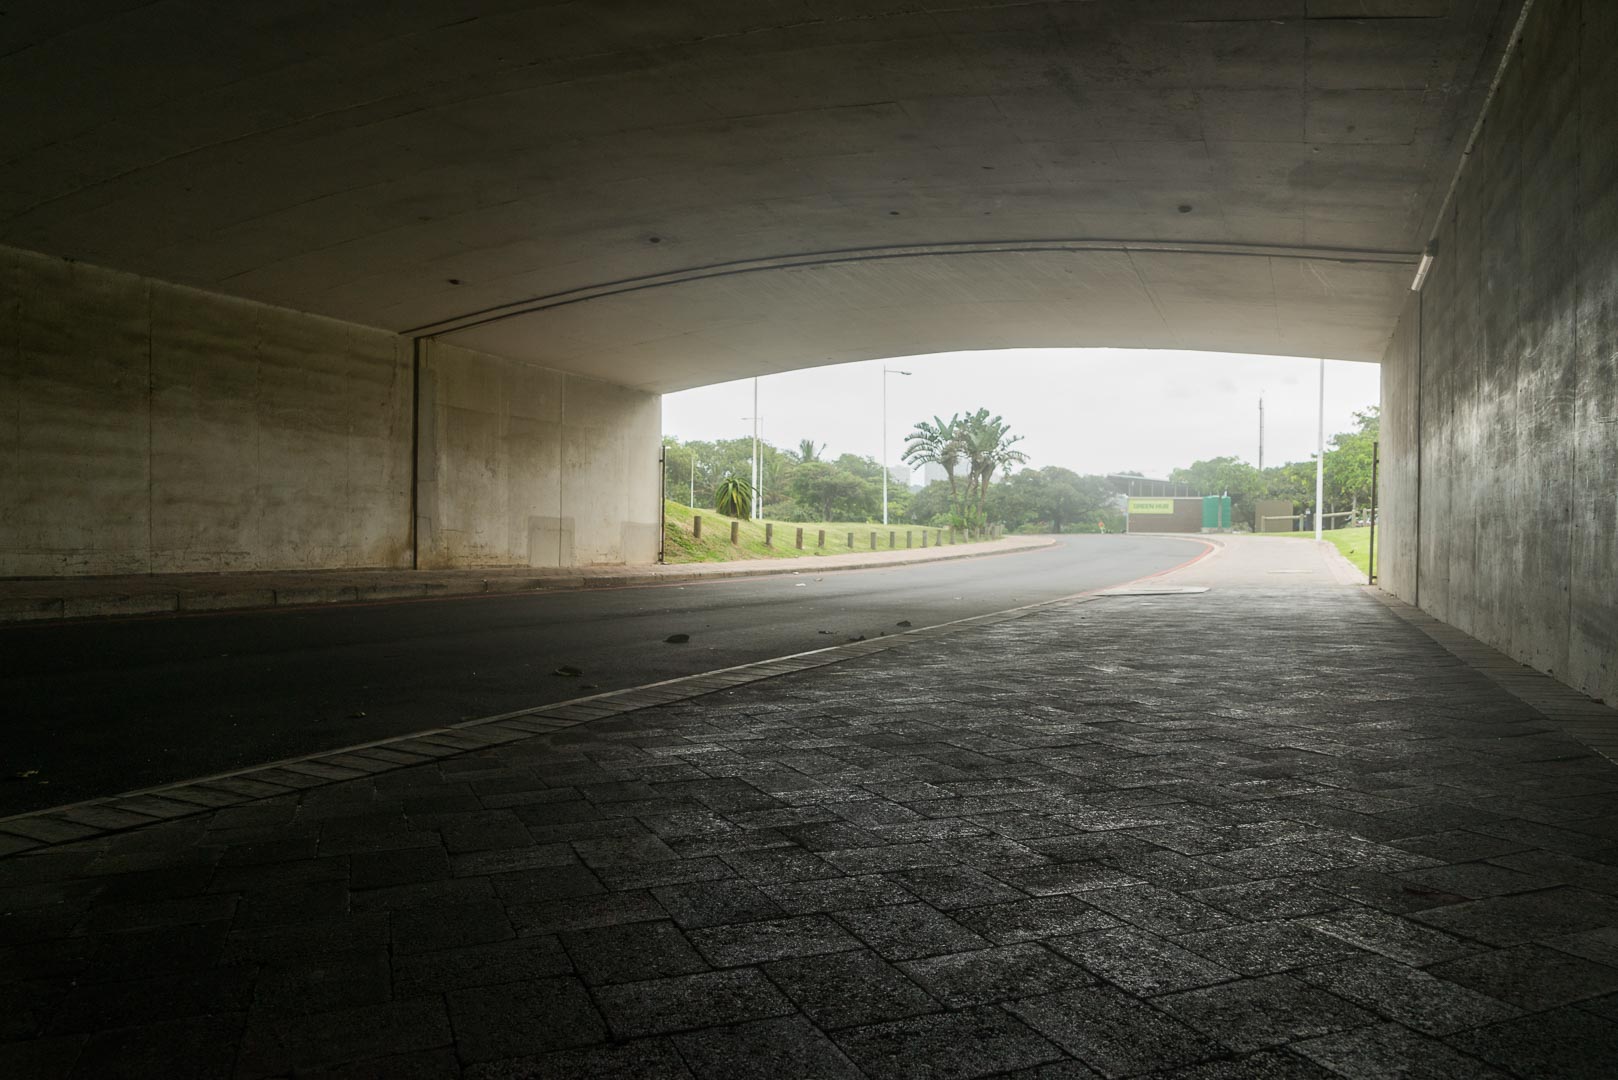 Backplate • ID: 10111 • HDRI Haven - Road Underpass